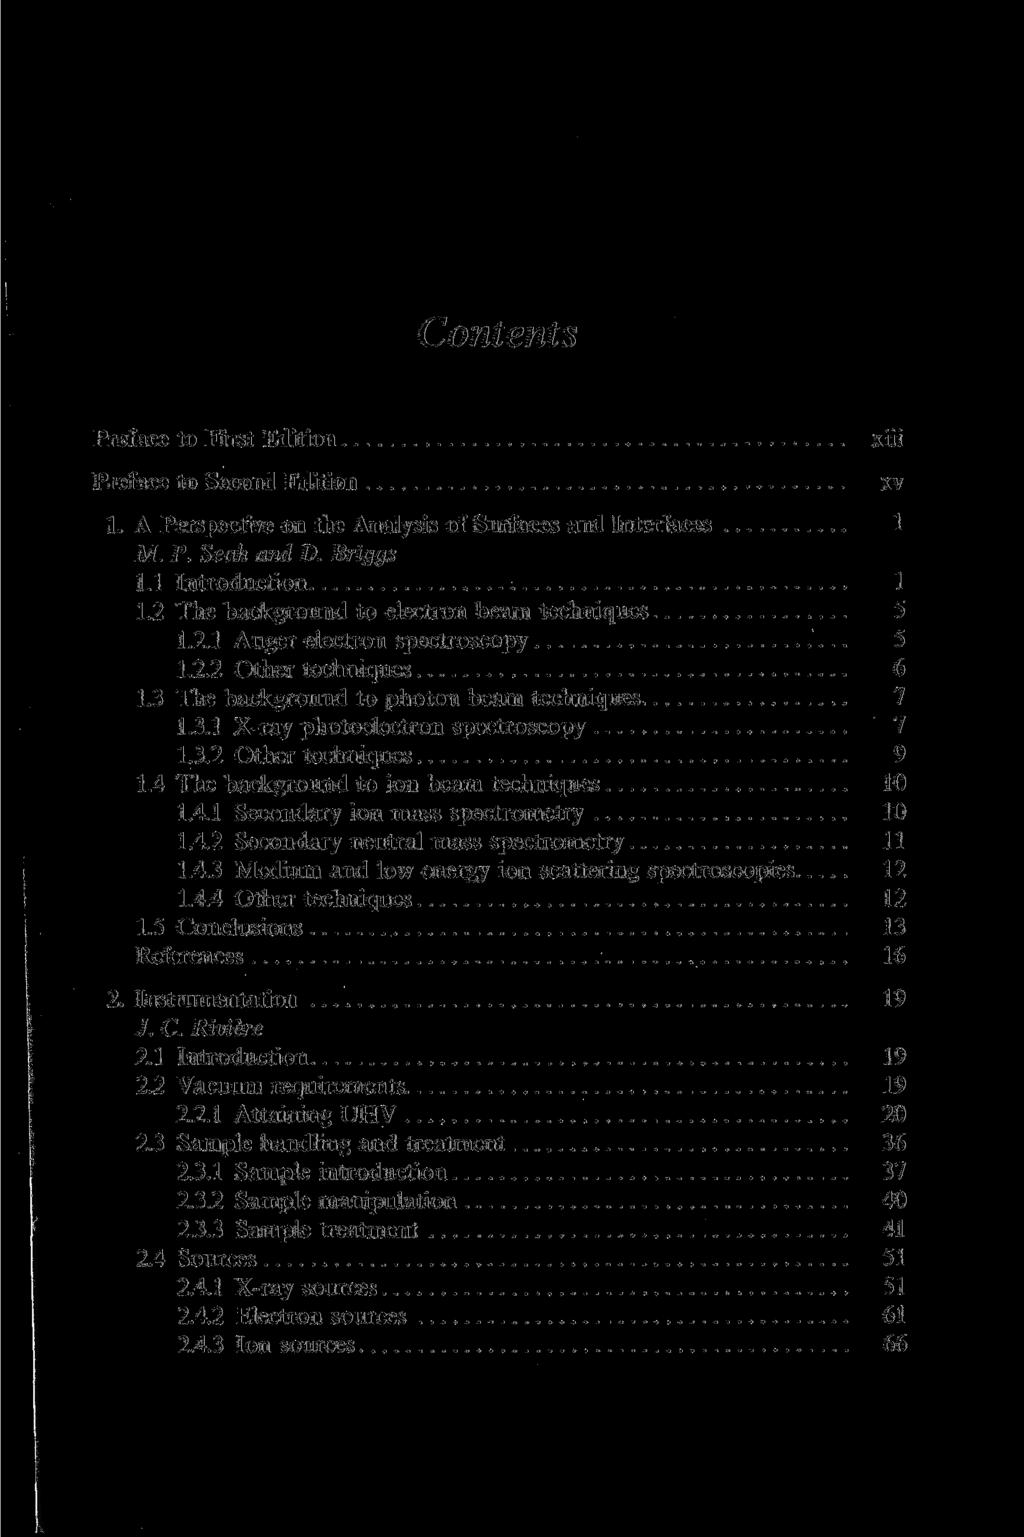 Contents Preface to First Edition Preface to Second Edition 1. A Perspective on the Analysis of Surfaces and Interfaces 1 M. P. Seah and D. Briggs 1.1 Introduction 1 1.